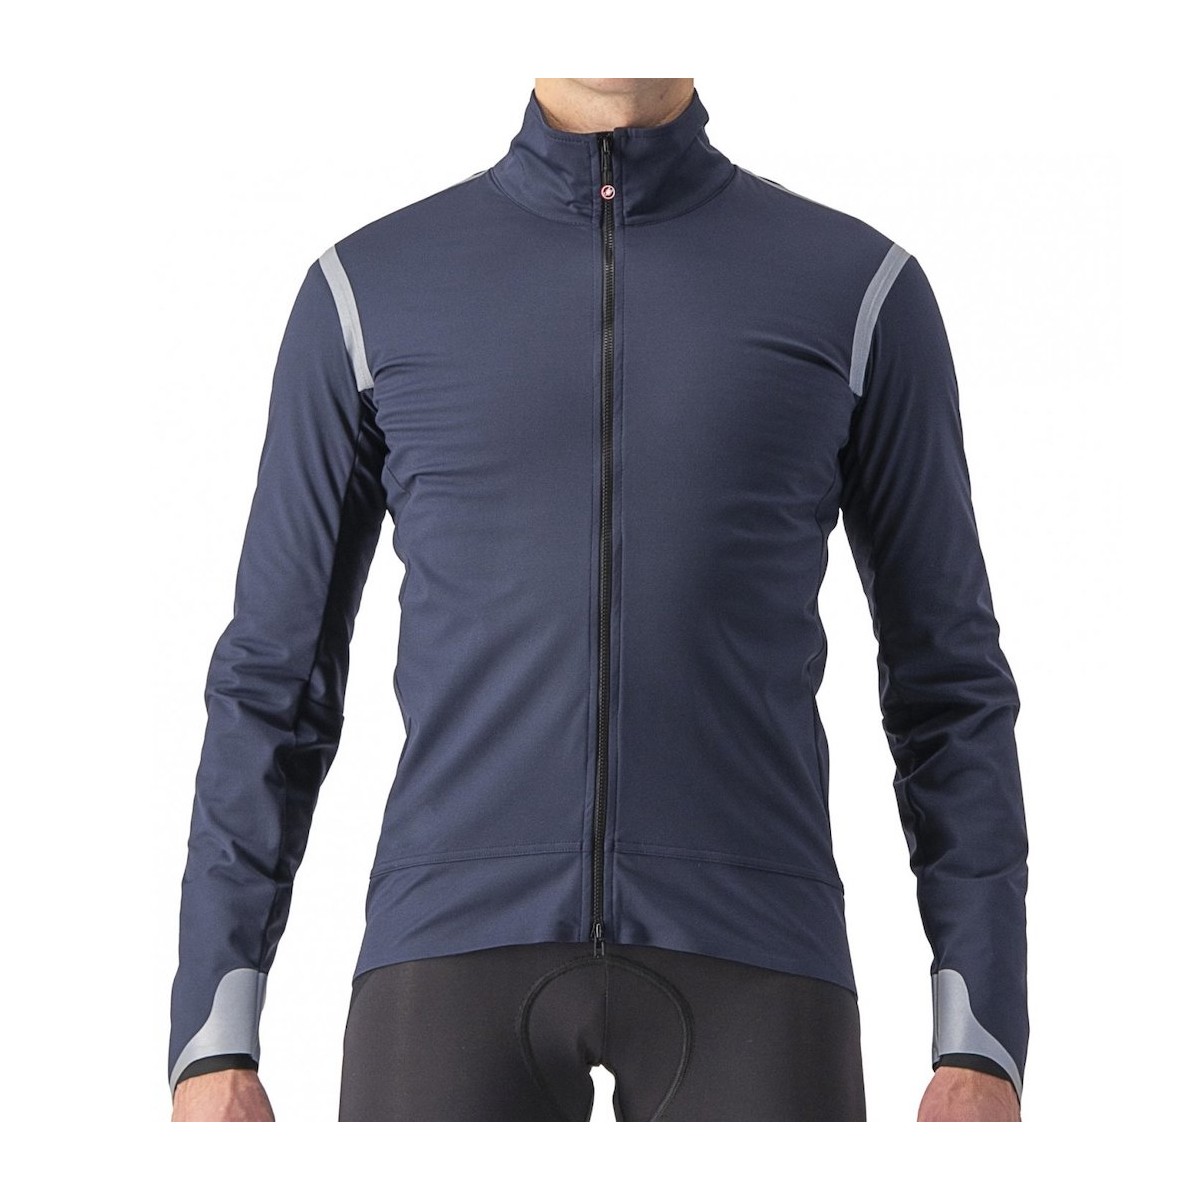 CASTELLI ALPHA ULTIMATE INSULATED cycling jacket - navy blue